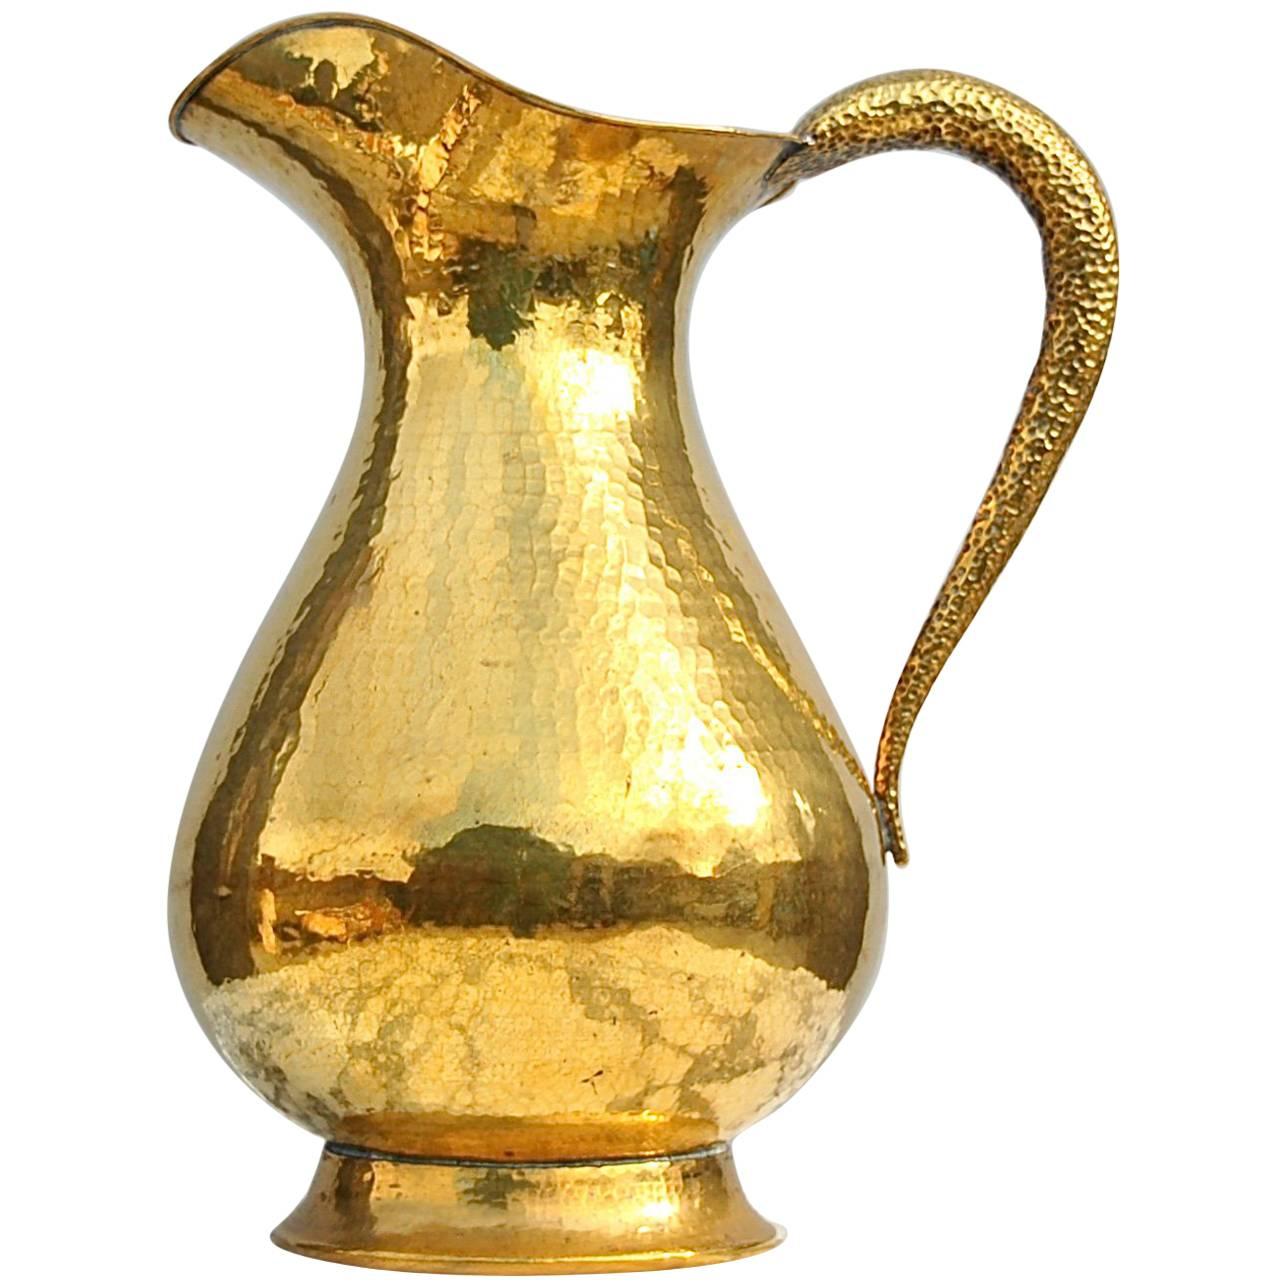 Richly textured handmade oversize vase or umbrella stand in the shape of a jug. The main body is made from a single thick piece or sheet of hammered brass, a work done by hand by an experienced craftsman. The surface of the curved handle has a